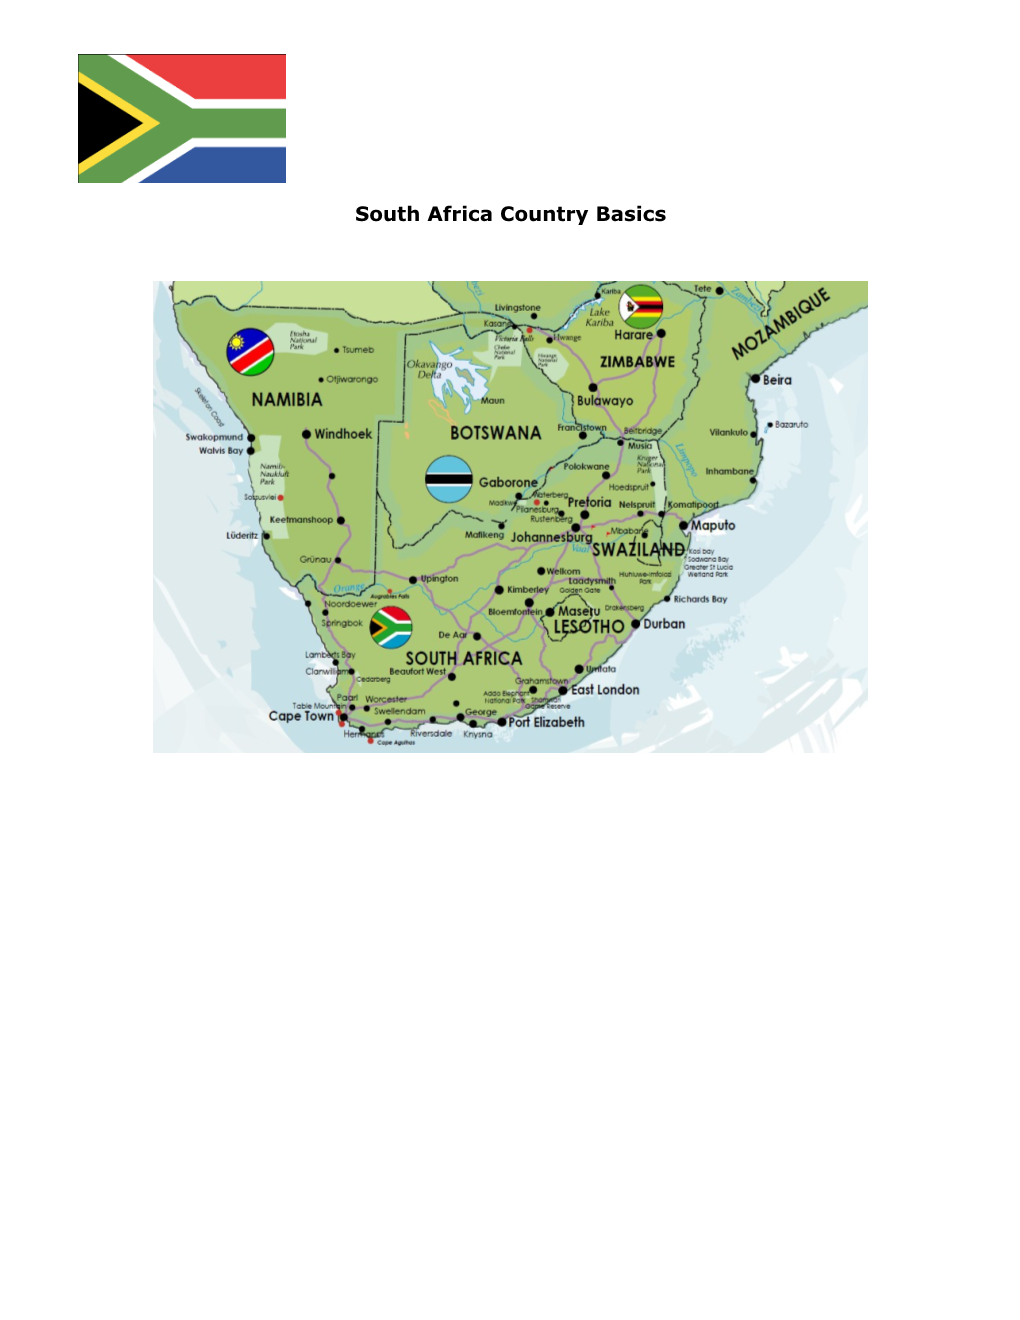 Countries Exempt from South African Visas